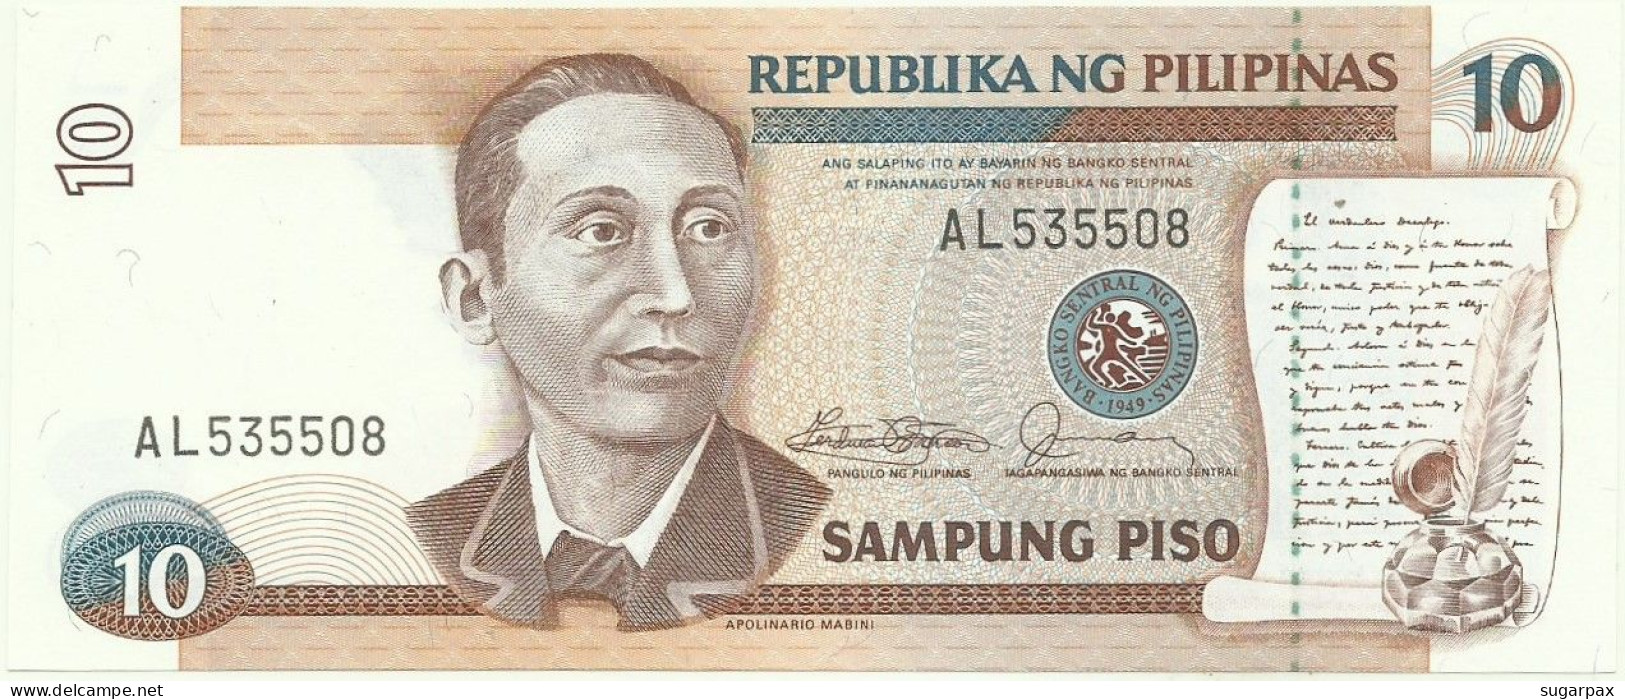 PHILIPPINES - 10 Piso - ND ( 1985 - 1994 ) Pick 169.a - Unc. - Sign. 10 - Serie AL - Seal Type 4 - Filipinas